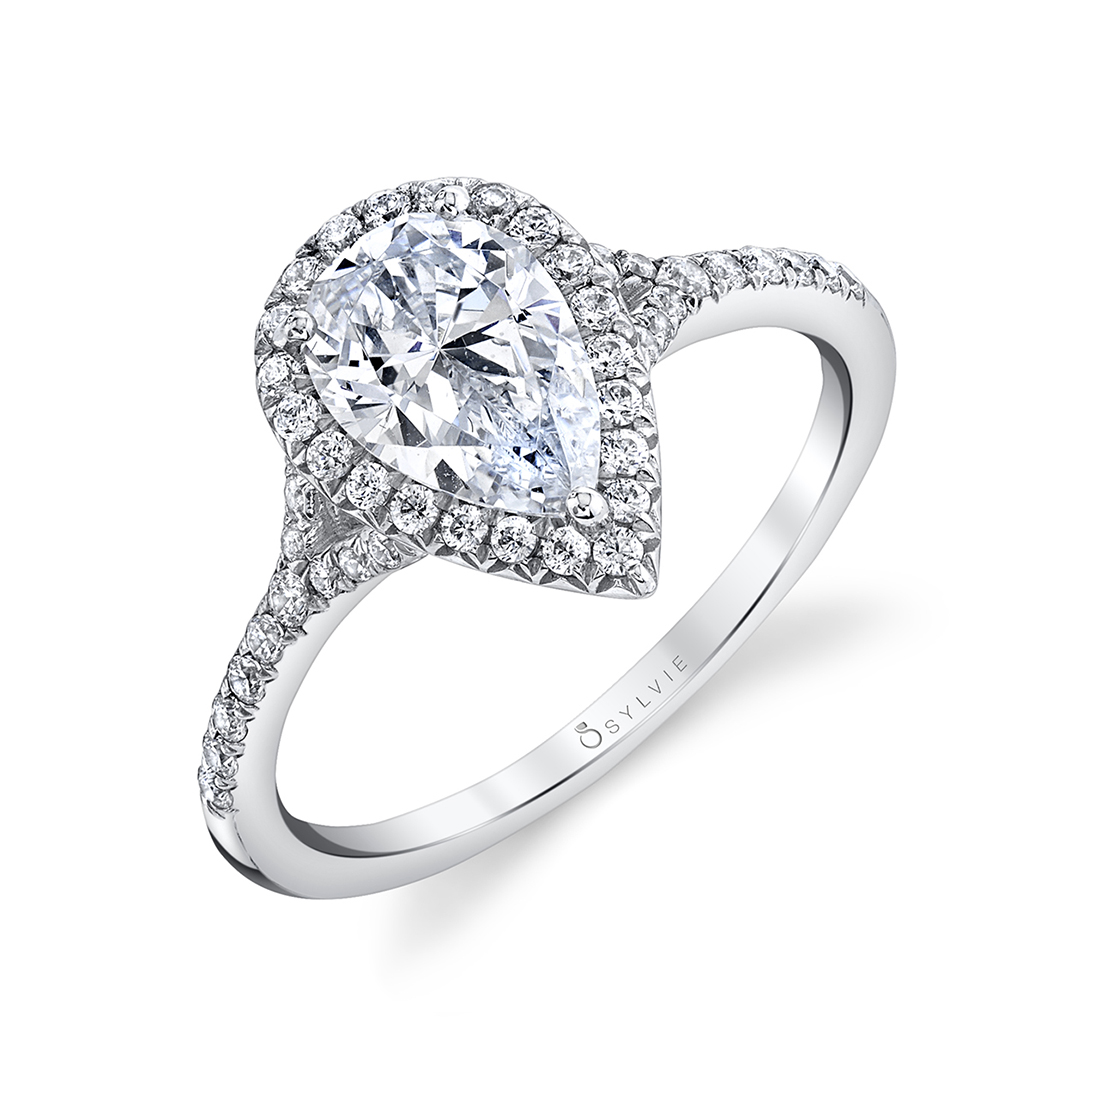 Halo Engagement Ring with Micro Split Shank - Alexandra SVS Fine Jewelry Oceanside, NY